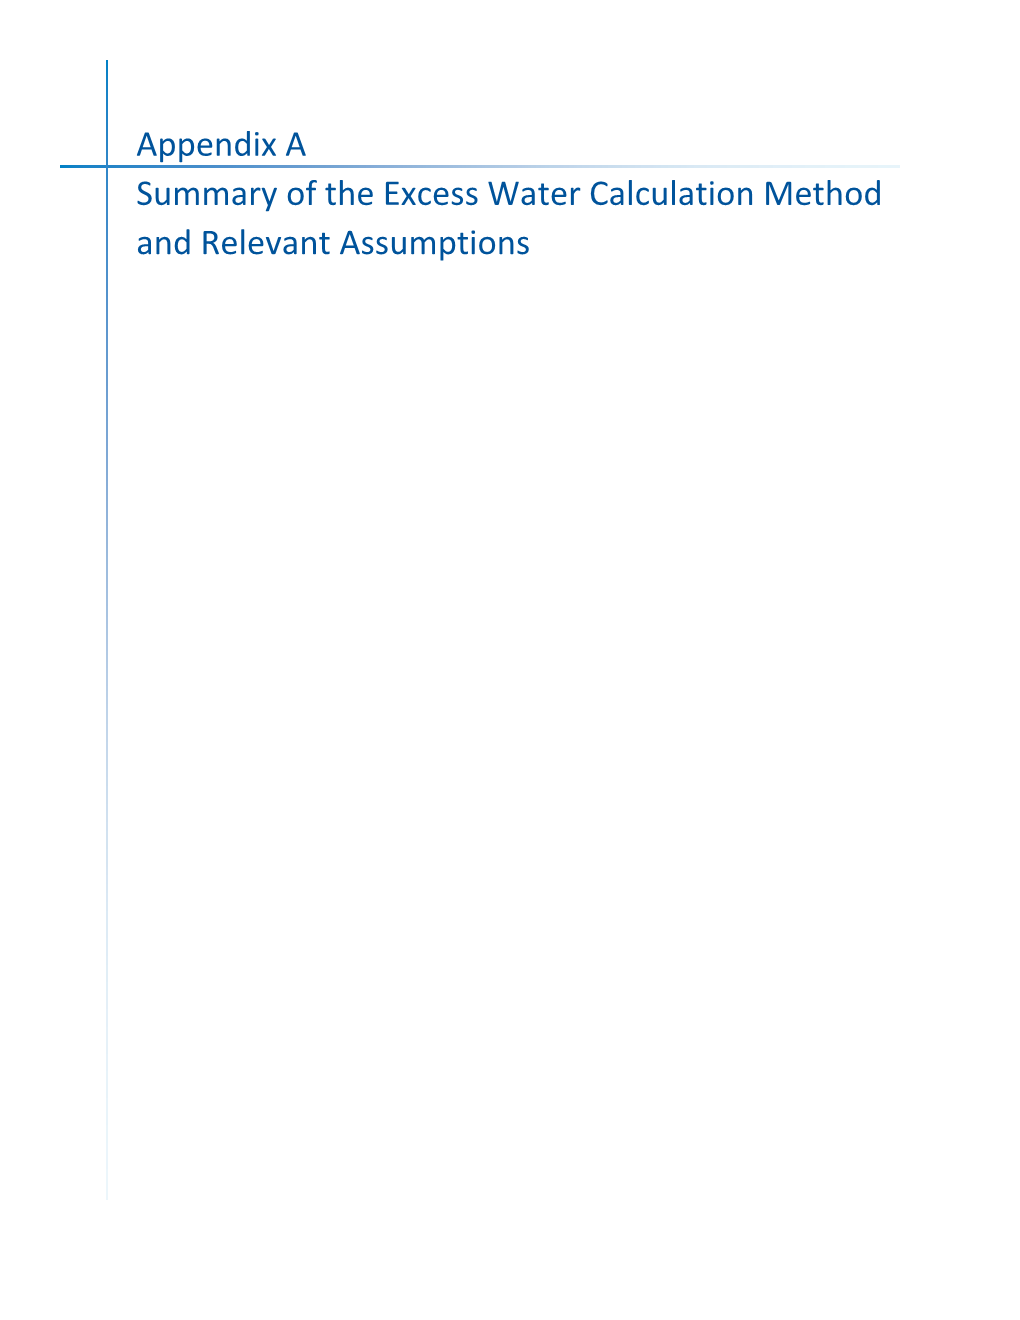 Appendix a Summary of the Excess Water Calculation Method and Relevant Assumptions